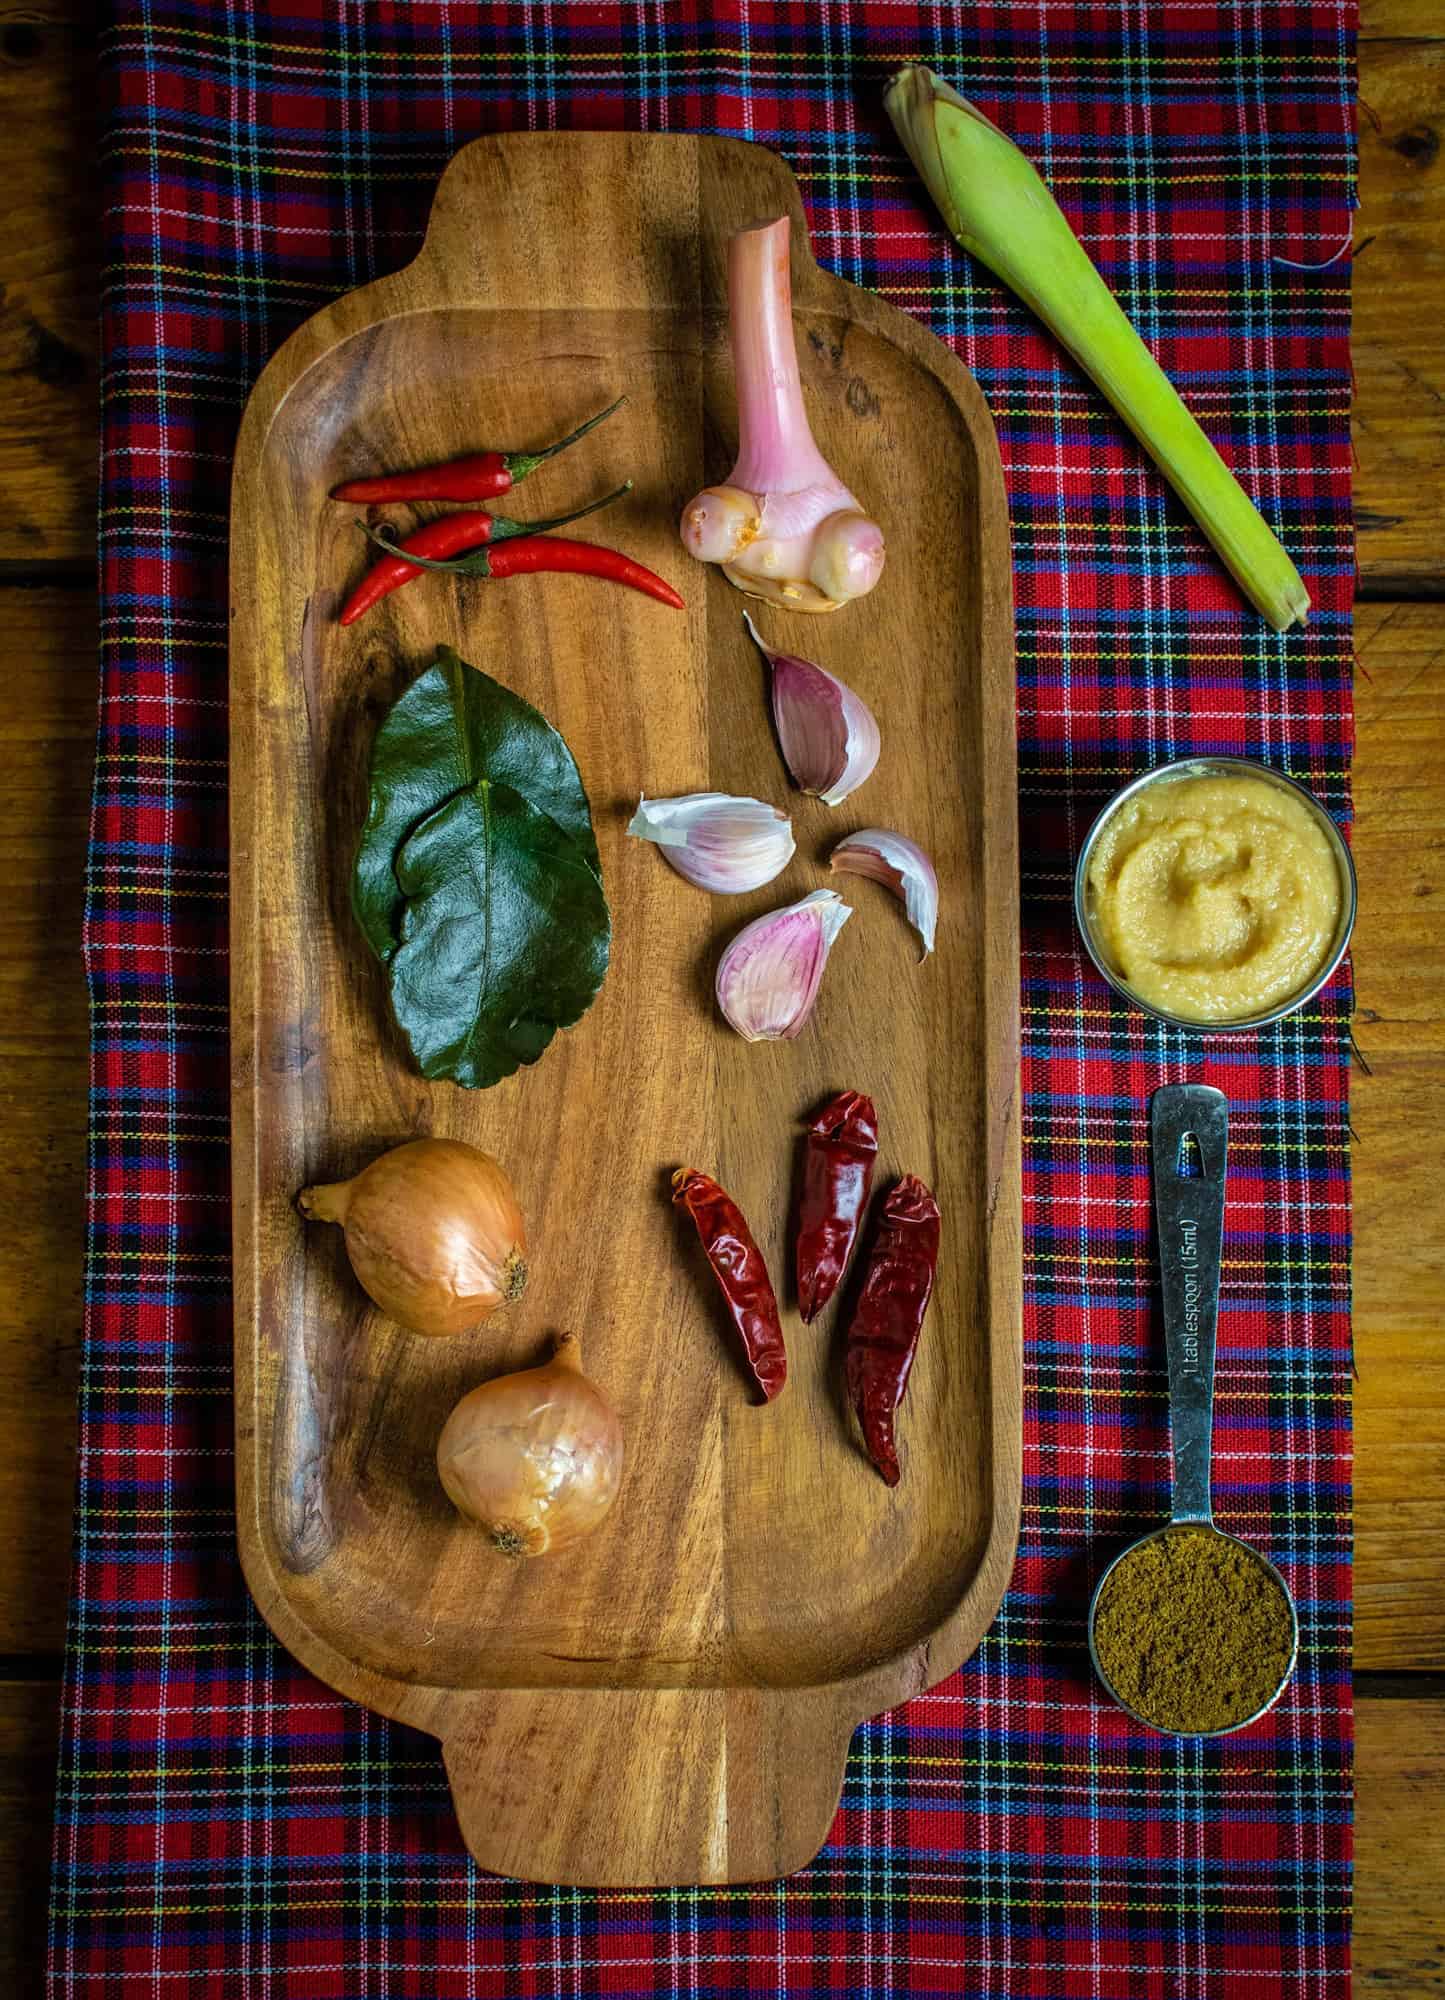 Ingredients for vegan Thai red curry paste including garlic, shallots, mis paste, cumin powder, kaffir lime leaves, galangal and dried chillies